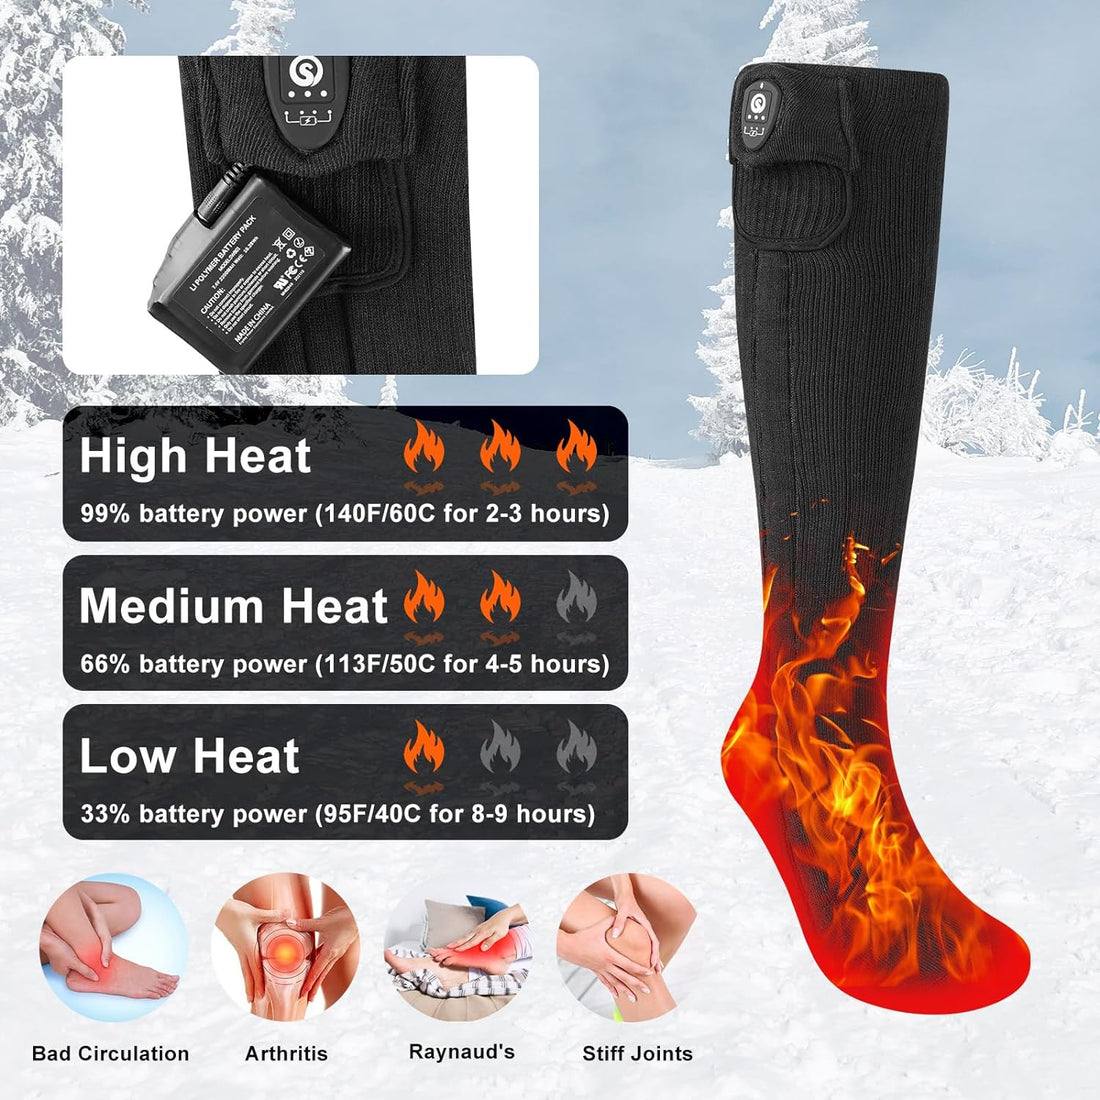 SAVIOR HEAT Heat Socks 2023 Upgraded - Rechargeable Electric Heated Socks with Bluetooth Control, 7.4V 2200mAh Battery, Cold Weather Warm Winter Socks for Men Women